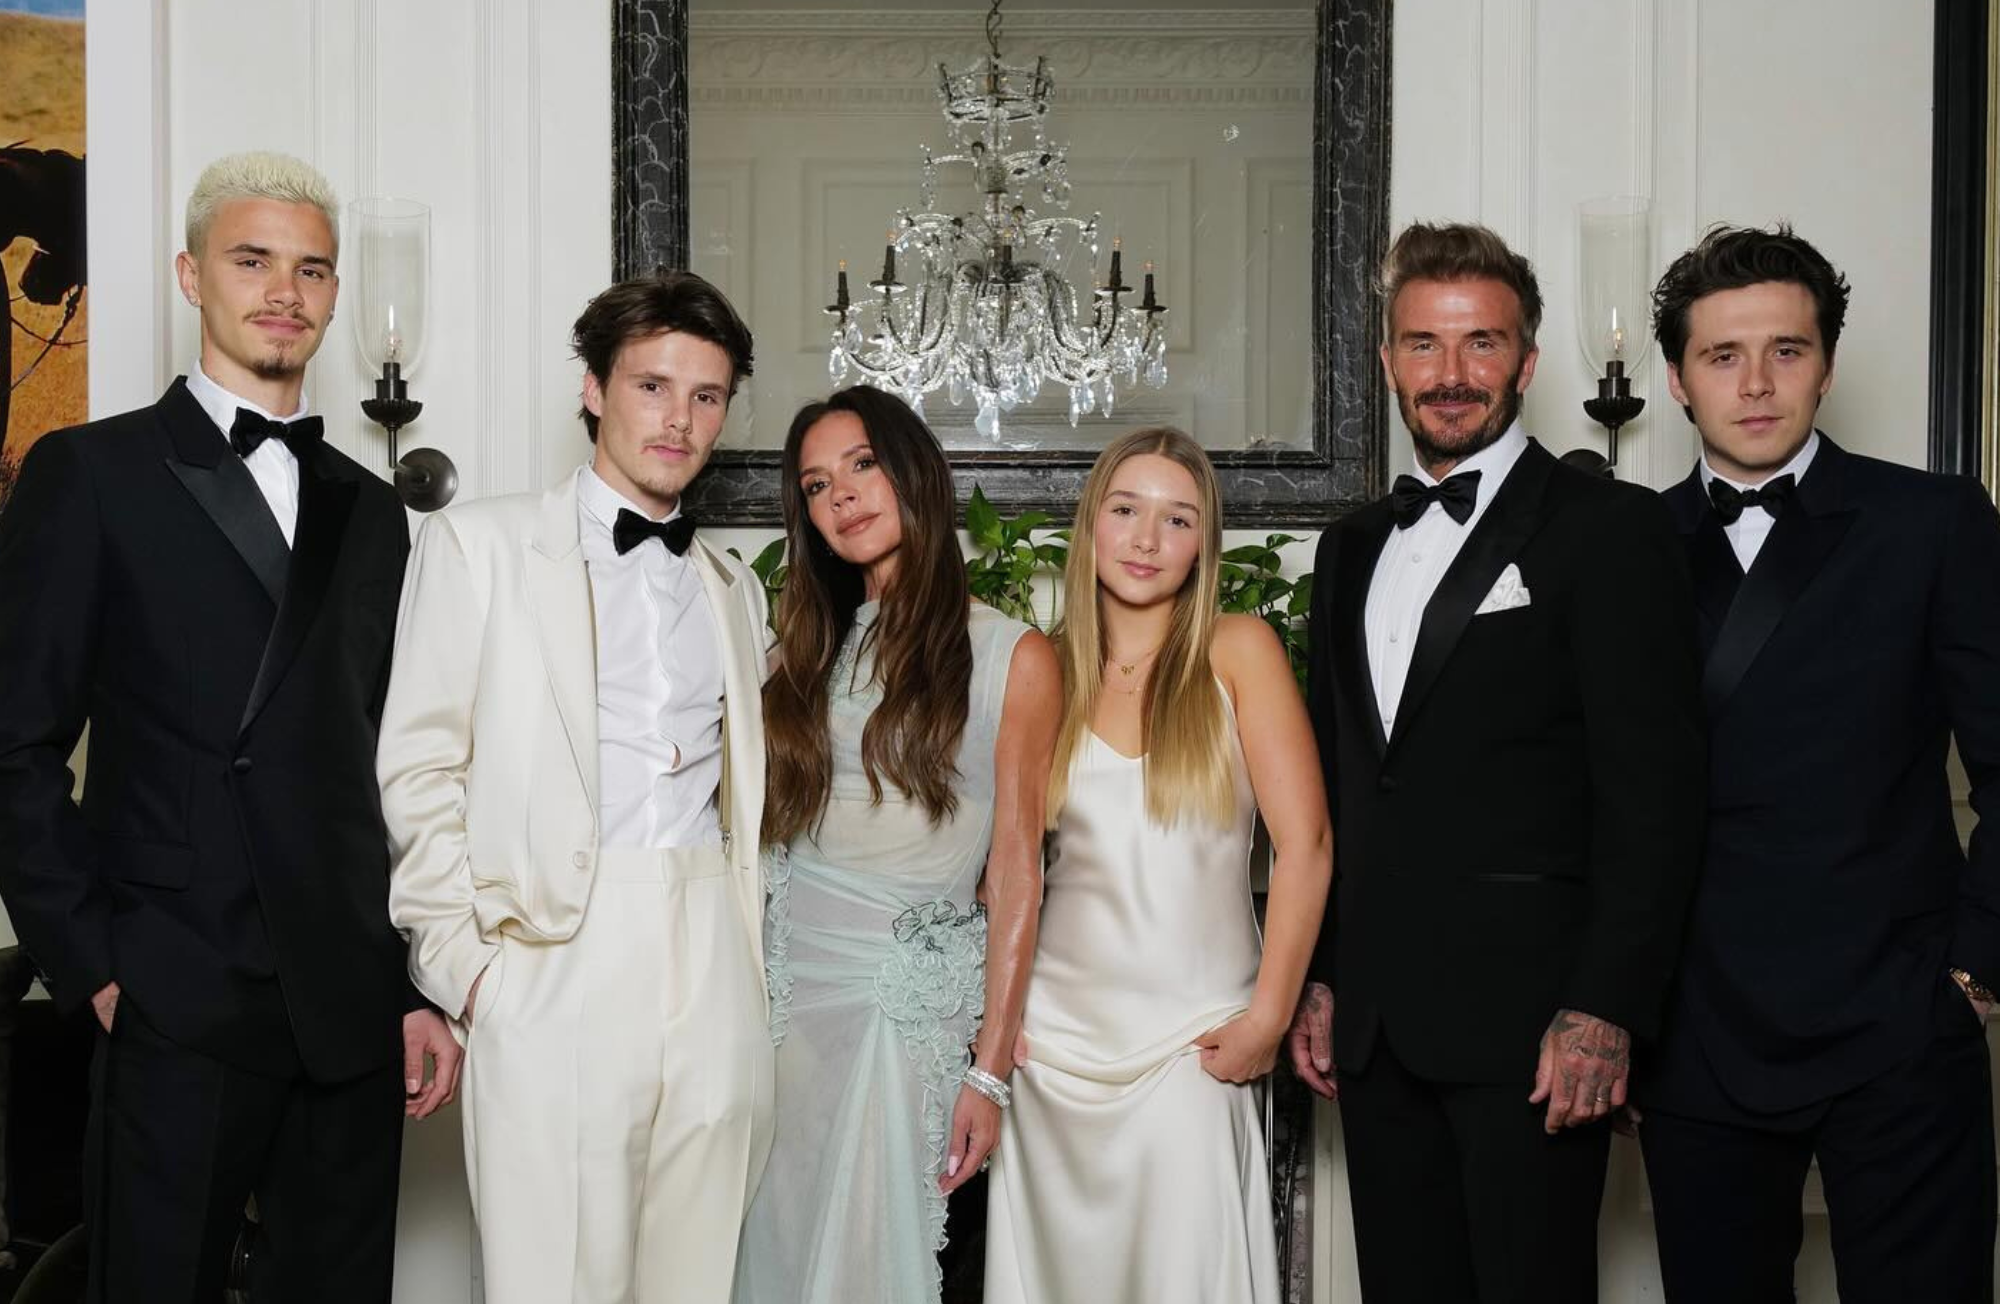 Wedding Guest Fashion: Get Inspired By Victoria Beckham’s 50th Birthday Outfits